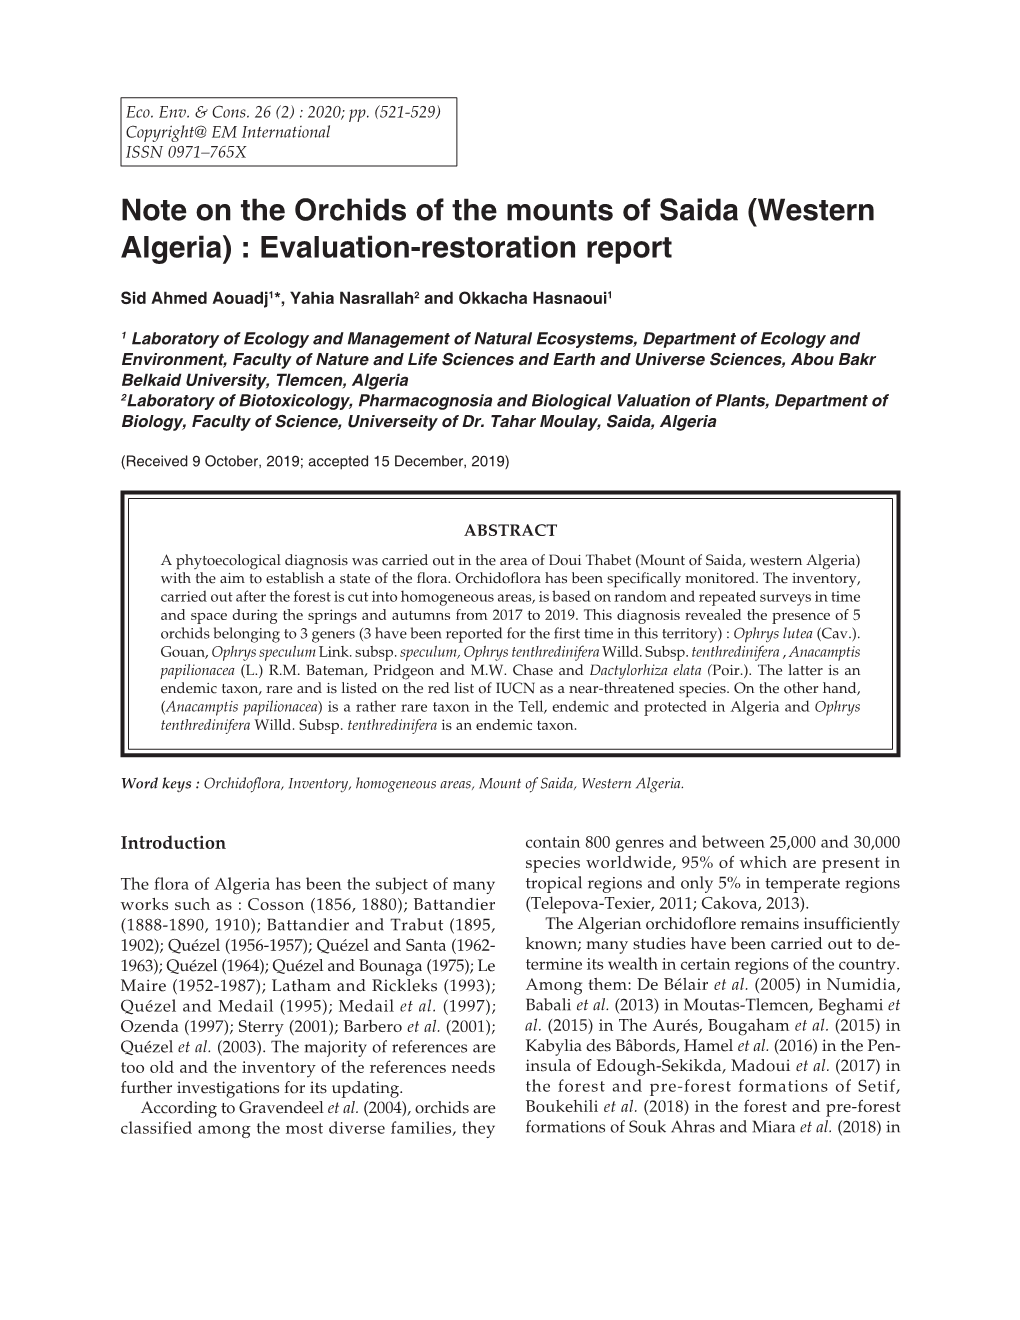 Note on the Orchids of the Mounts of Saida (Western Algeria) : Evaluation-Restoration Report